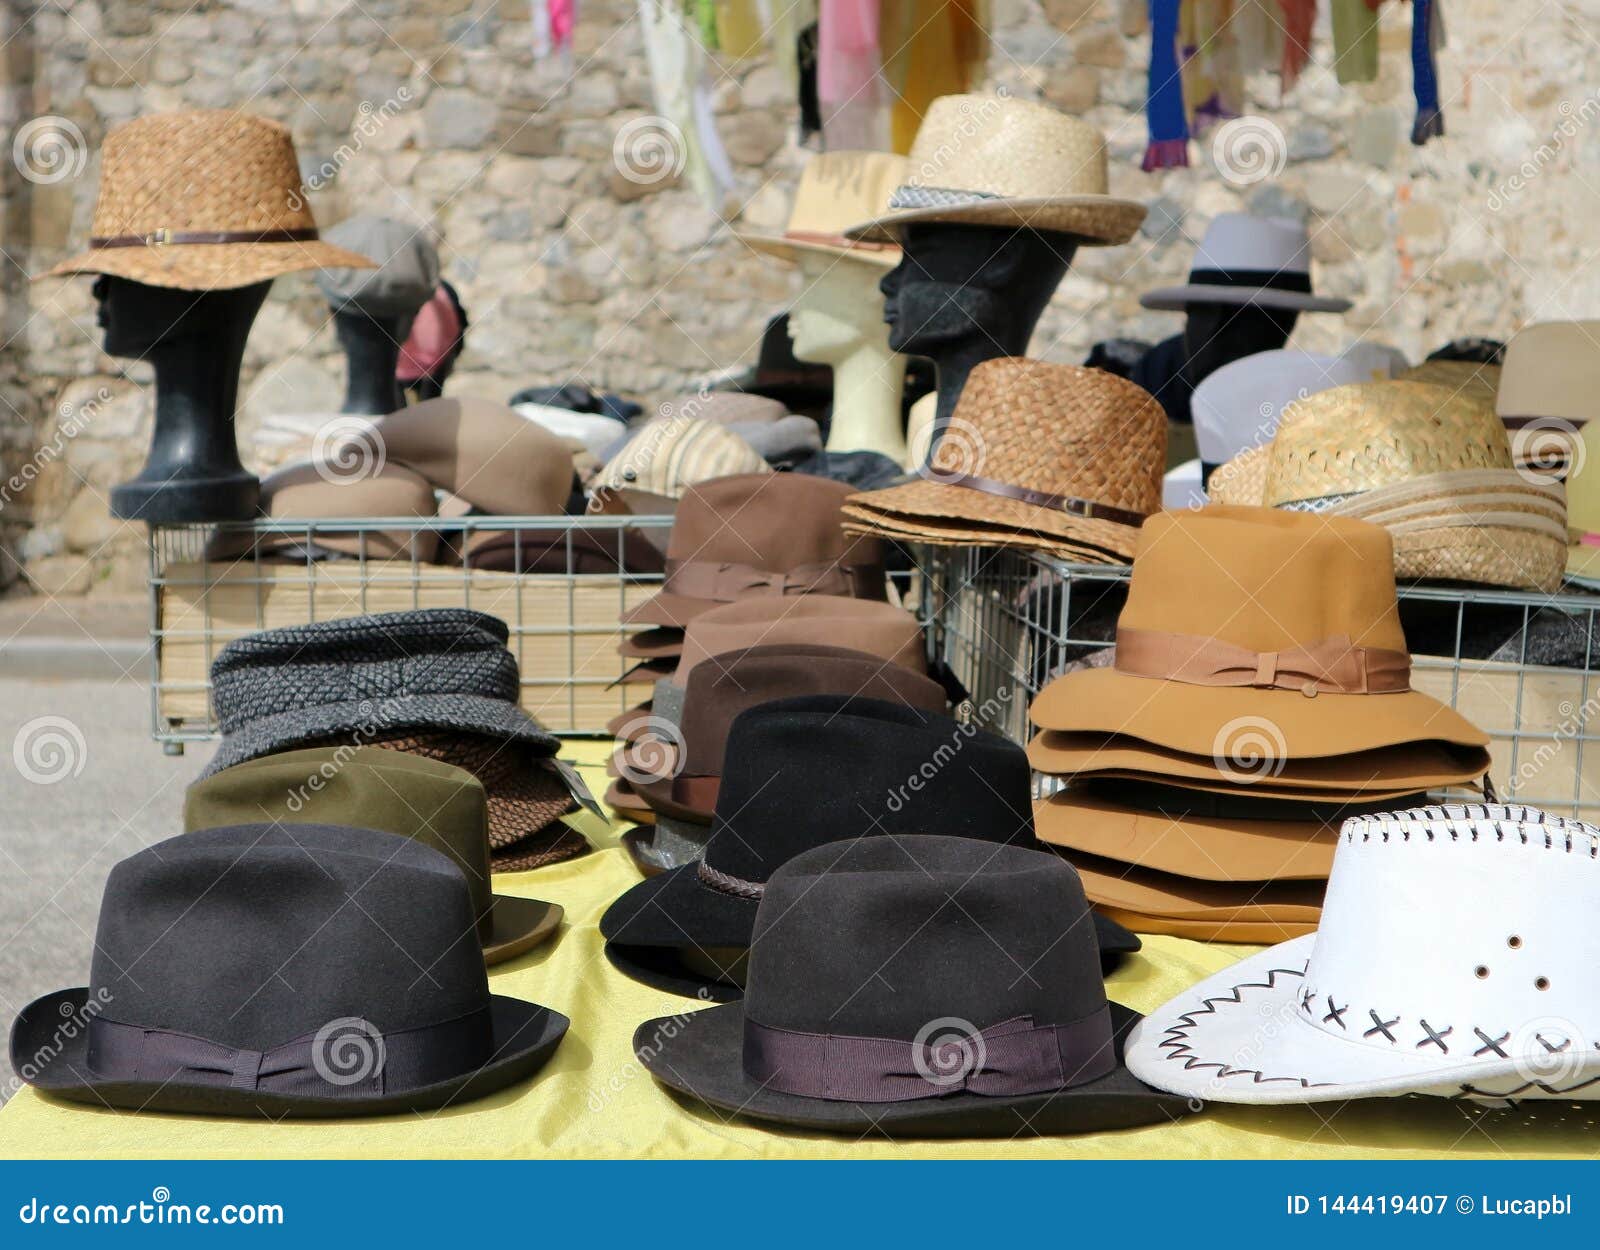 Different Style Men Hats on a Shelf of a Street Market. on Background,  Manikin Heads Wearing Straw Hats Stock Image - Image of cowboy, brown:  144419407